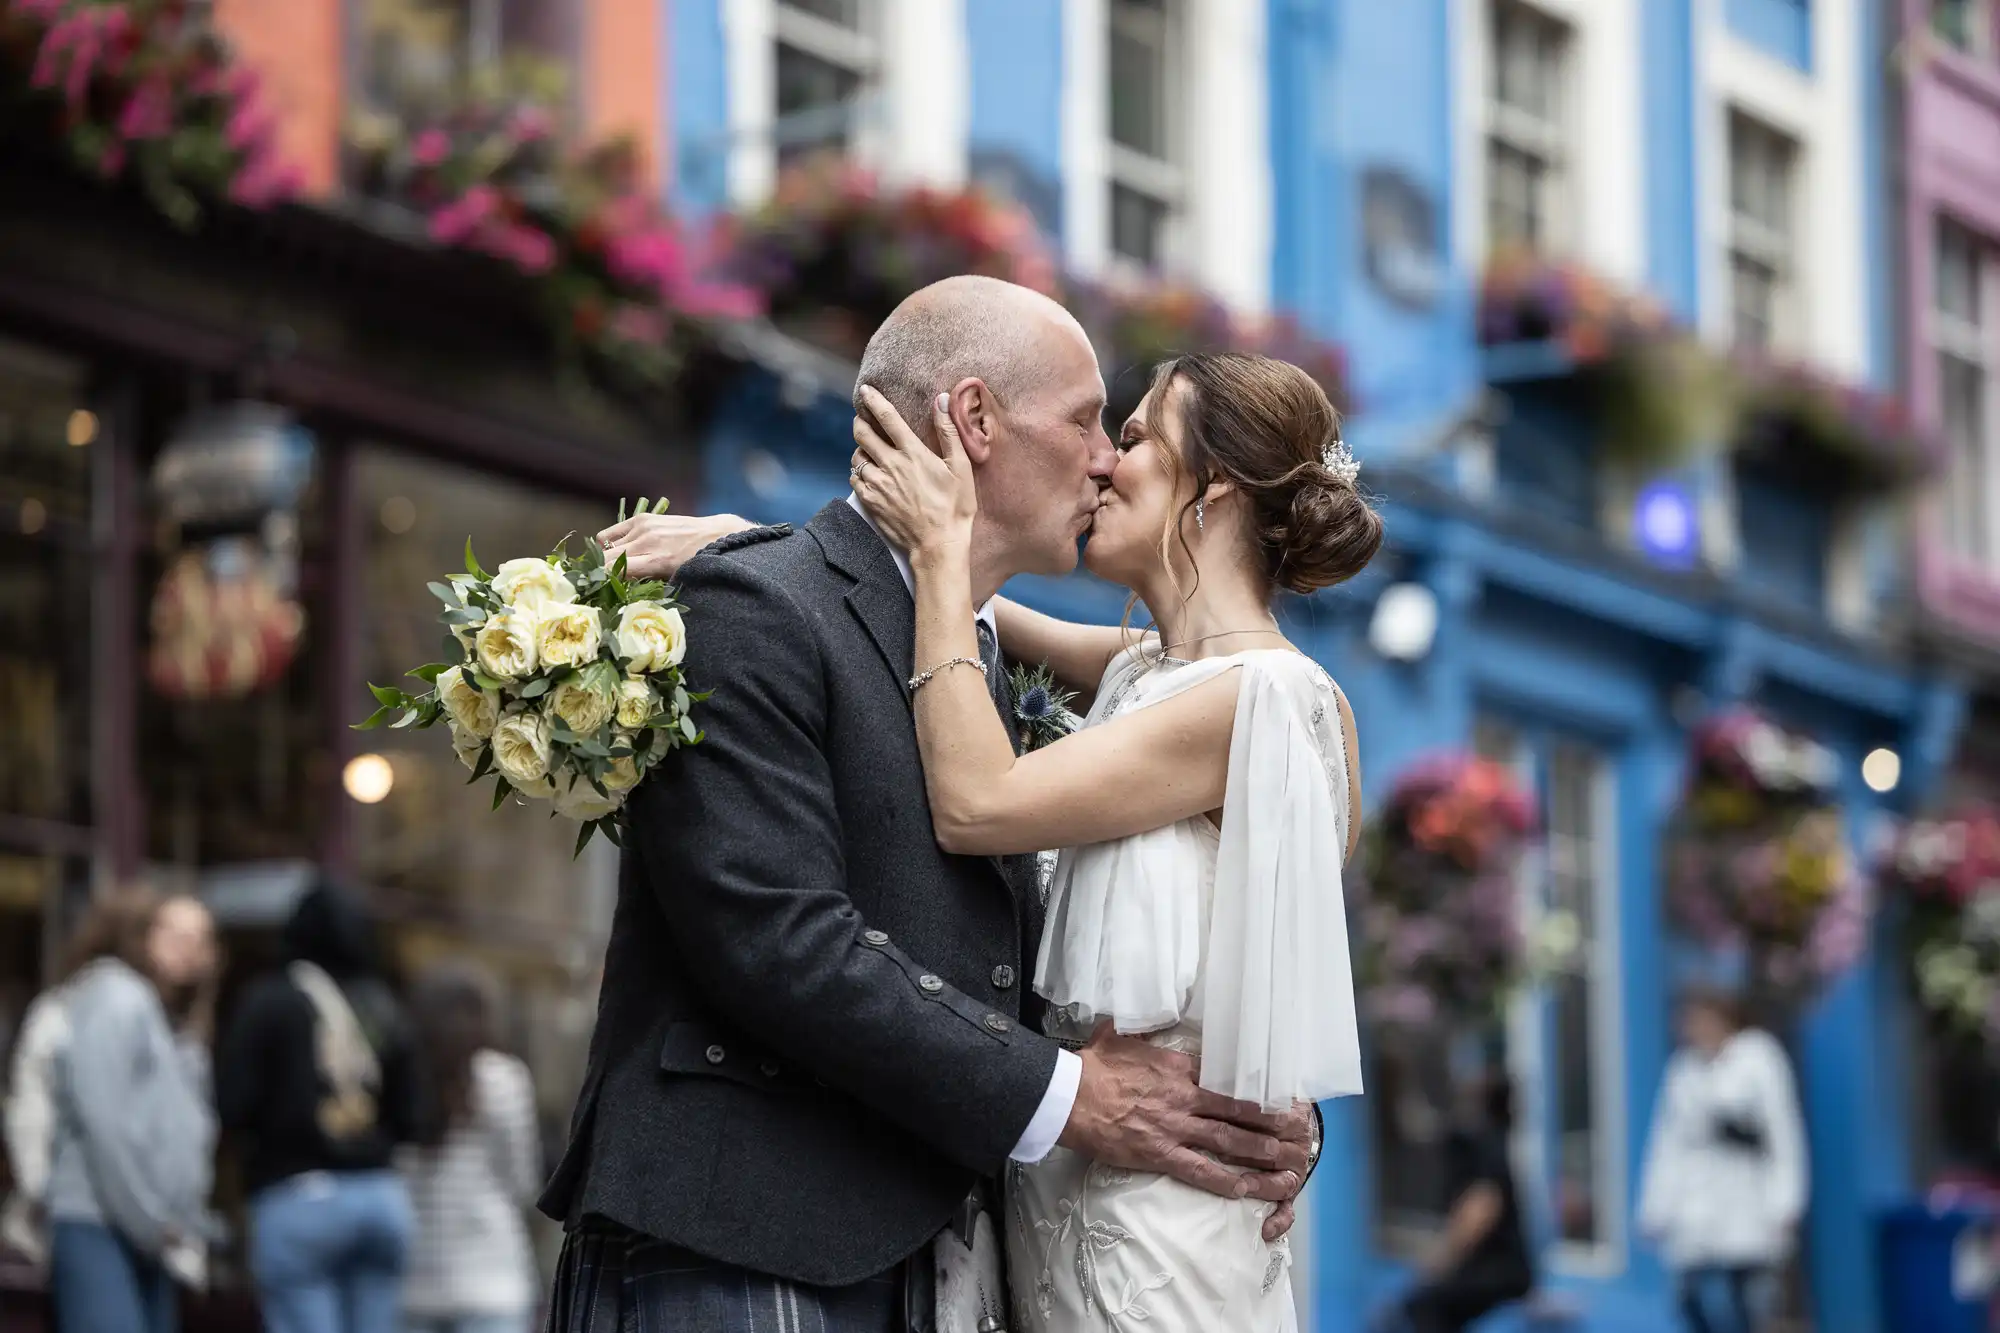 A couple in wedding attire shares a kiss on a colorful street. The groom holds a bouquet of flowers.